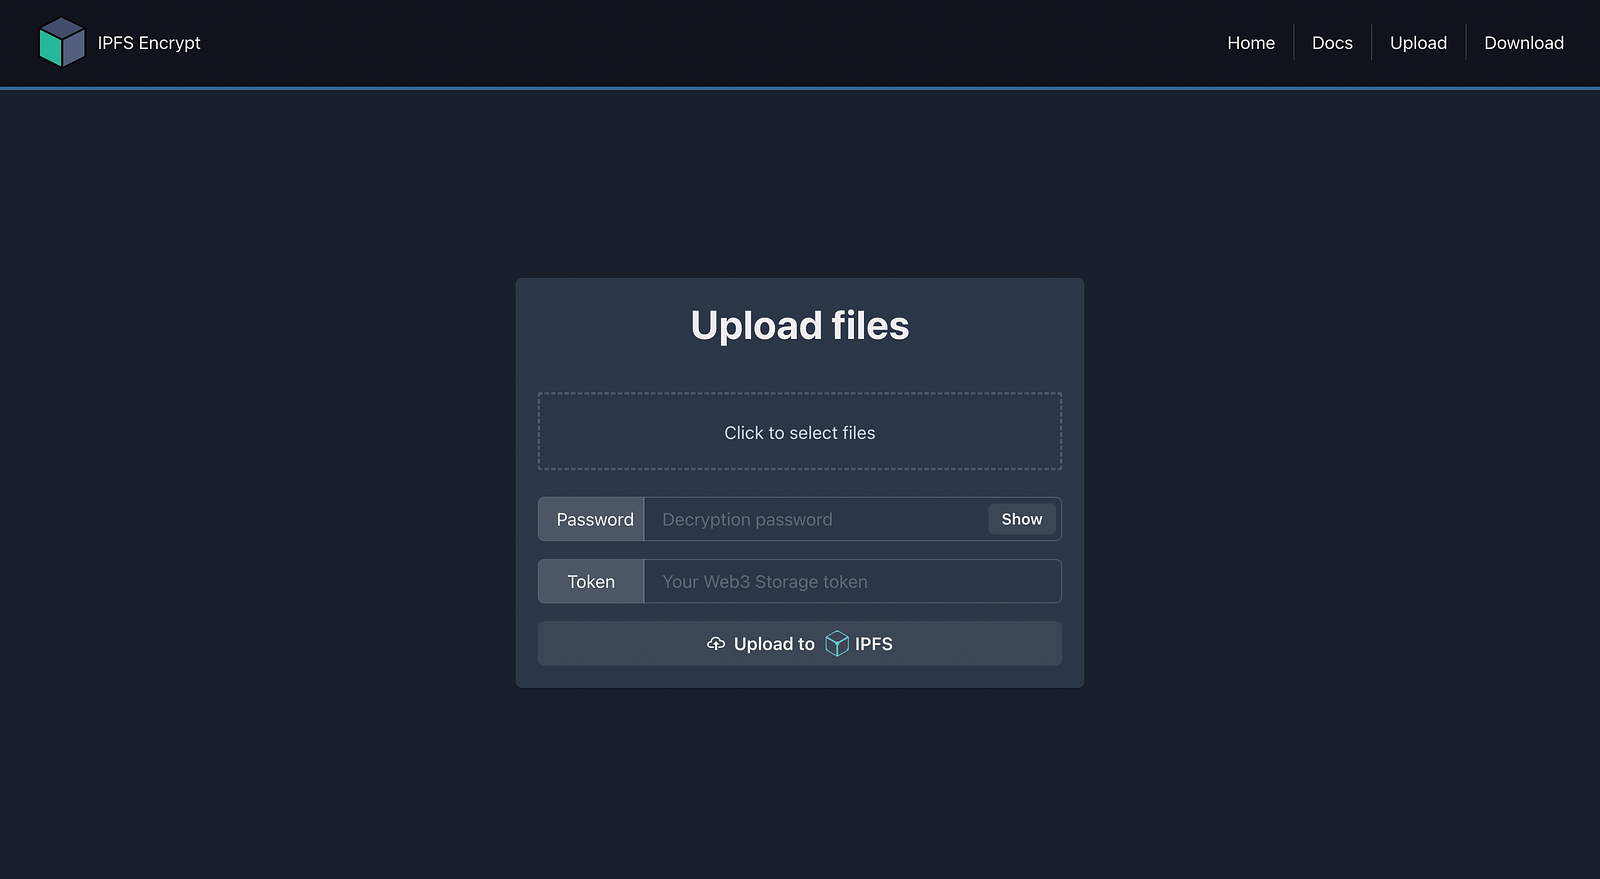 Uploading encrypted files to ipfs with password